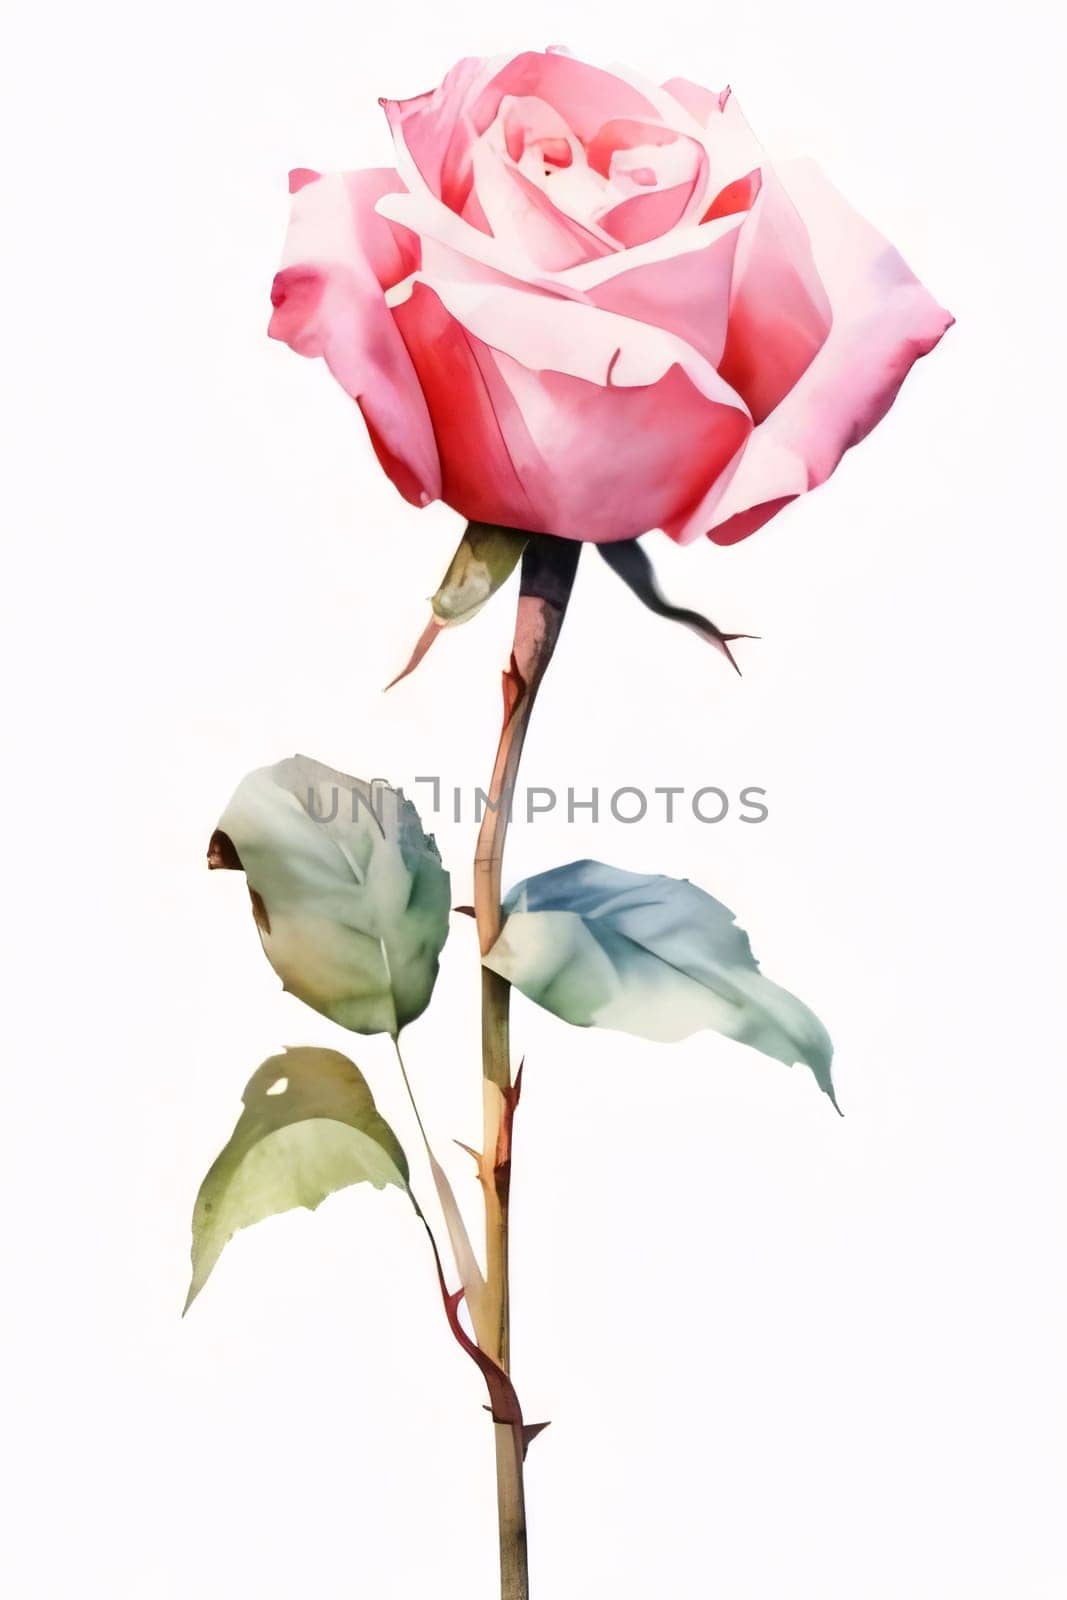 Drawn, painted red rose flower on isolated white background. Flowering flowers, a symbol of spring, new life. by ThemesS